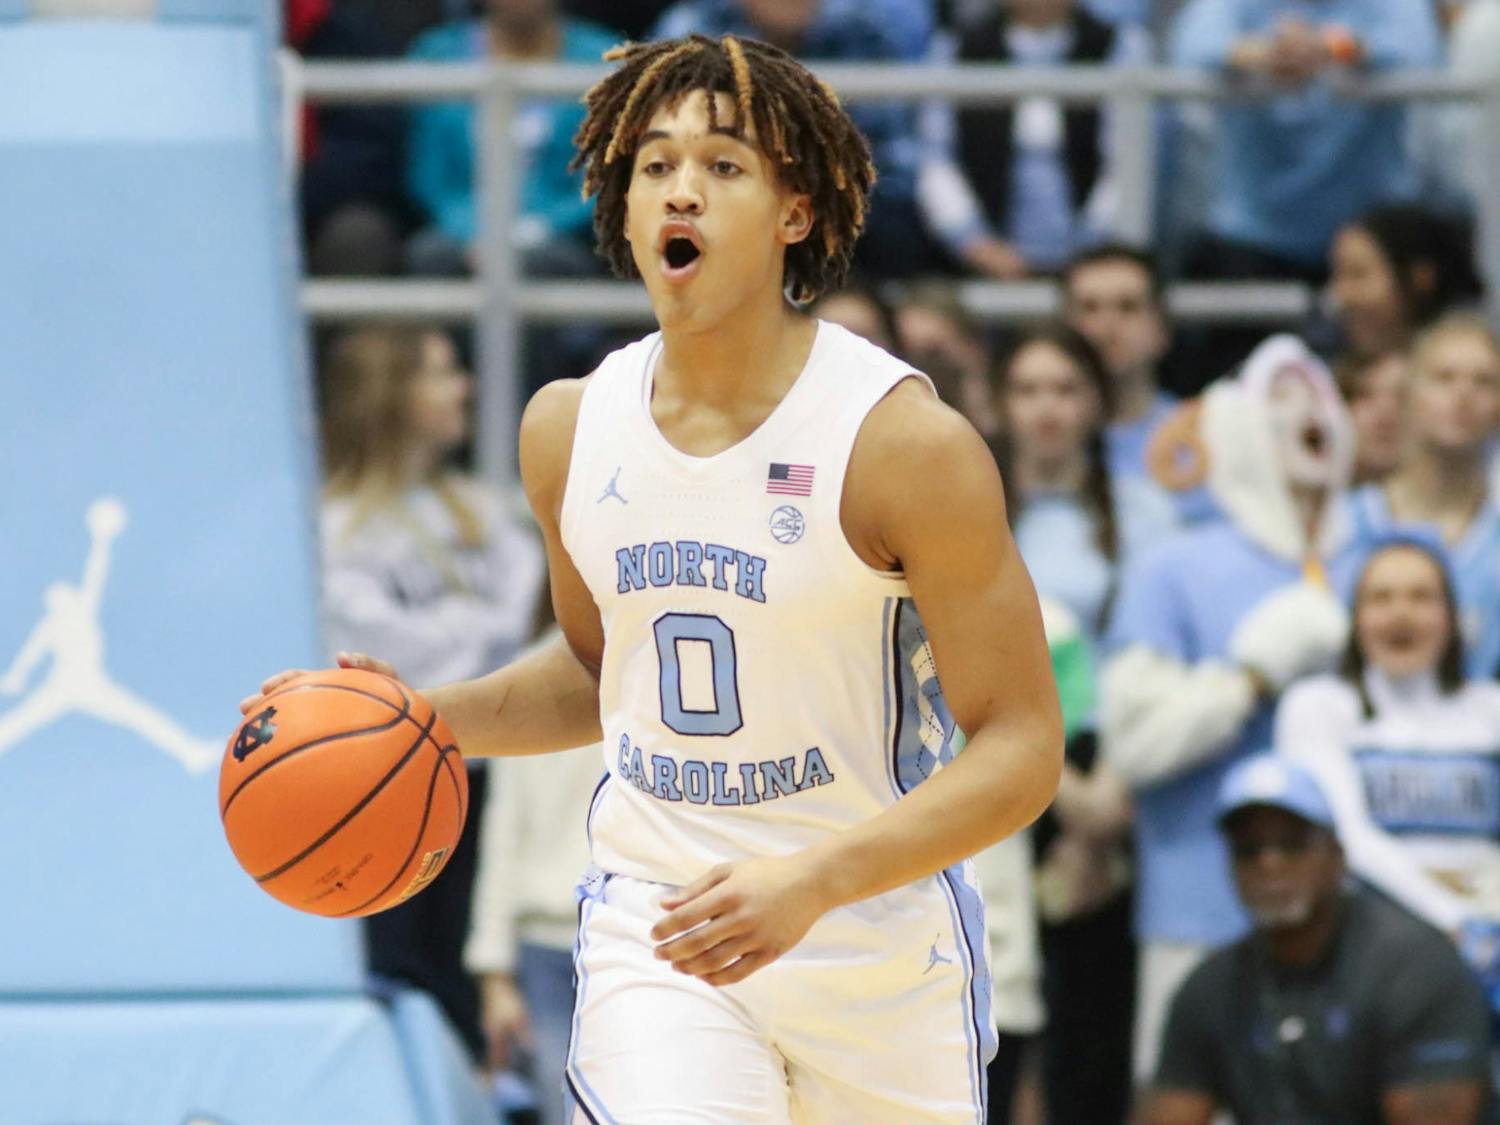 UNC freshman guard Seth Trimble (0) brings the ball up the court during the men's basketball game against The Citadel at the Dean Smith Center on Tuesday, Dec. 13, 2022. UNC beat The Citadel 100-67.